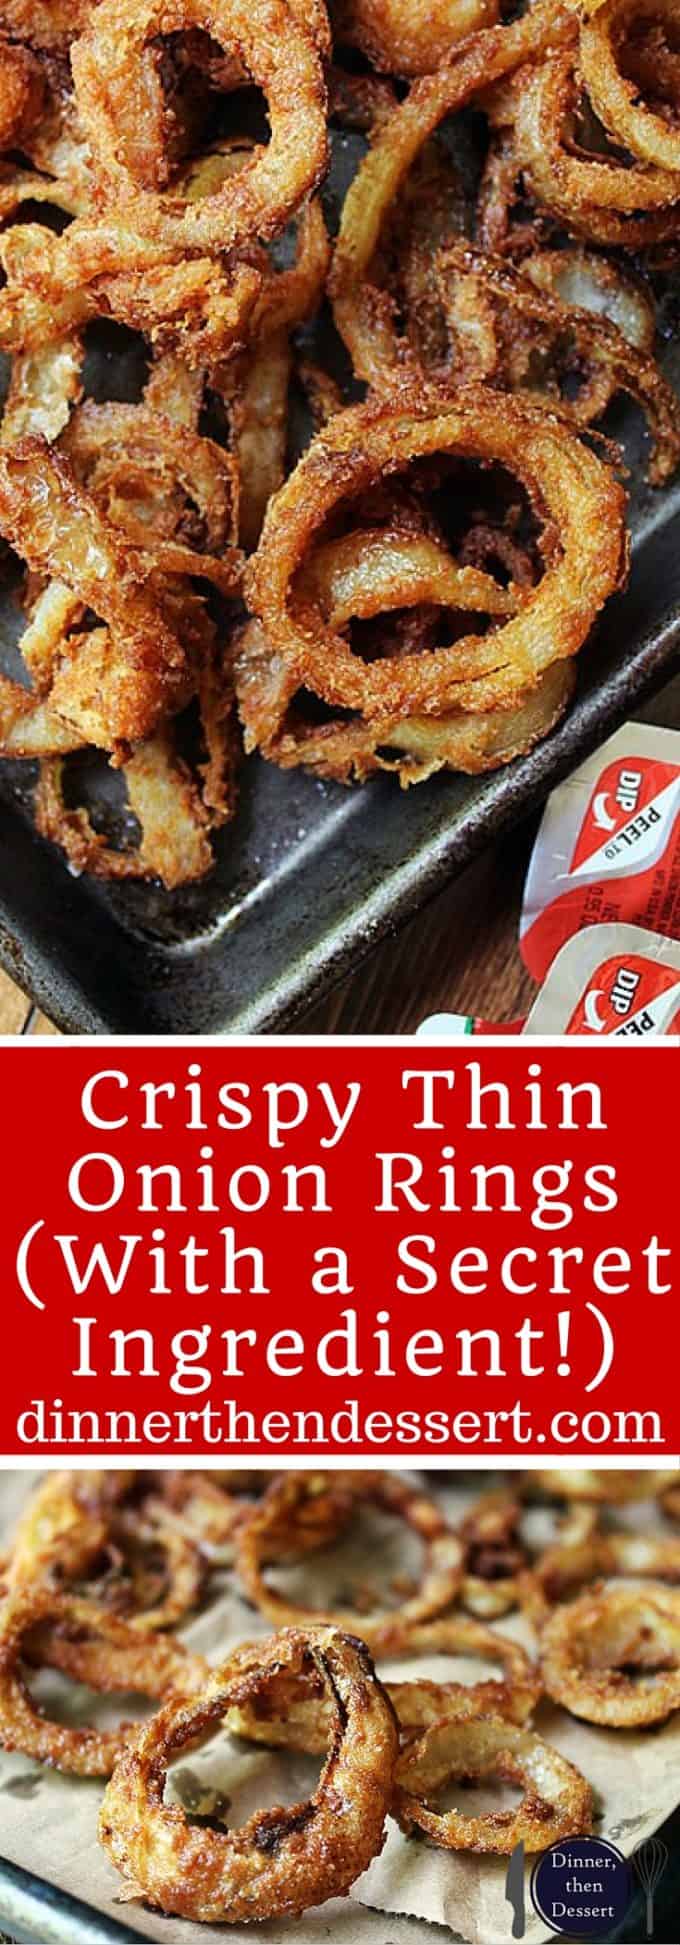 Easy delicious steakhouse-style Crispy thin onion rings! Made with just five ingredients and so good you'll eat most of them as you cook them!